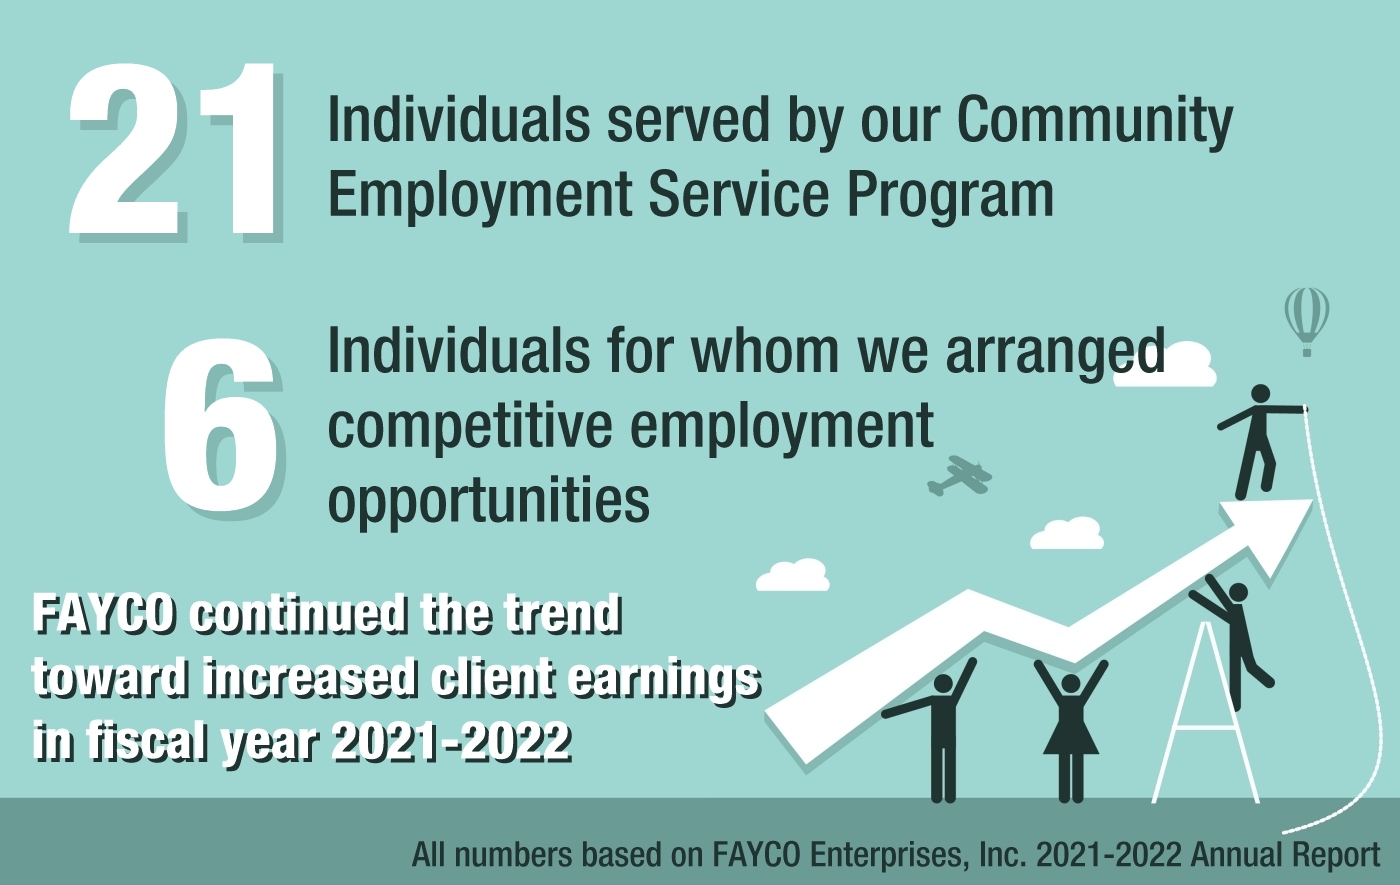 infographic with stick figures lifting an arrow pointed upward representing trends toward more client earnings and work program statistics